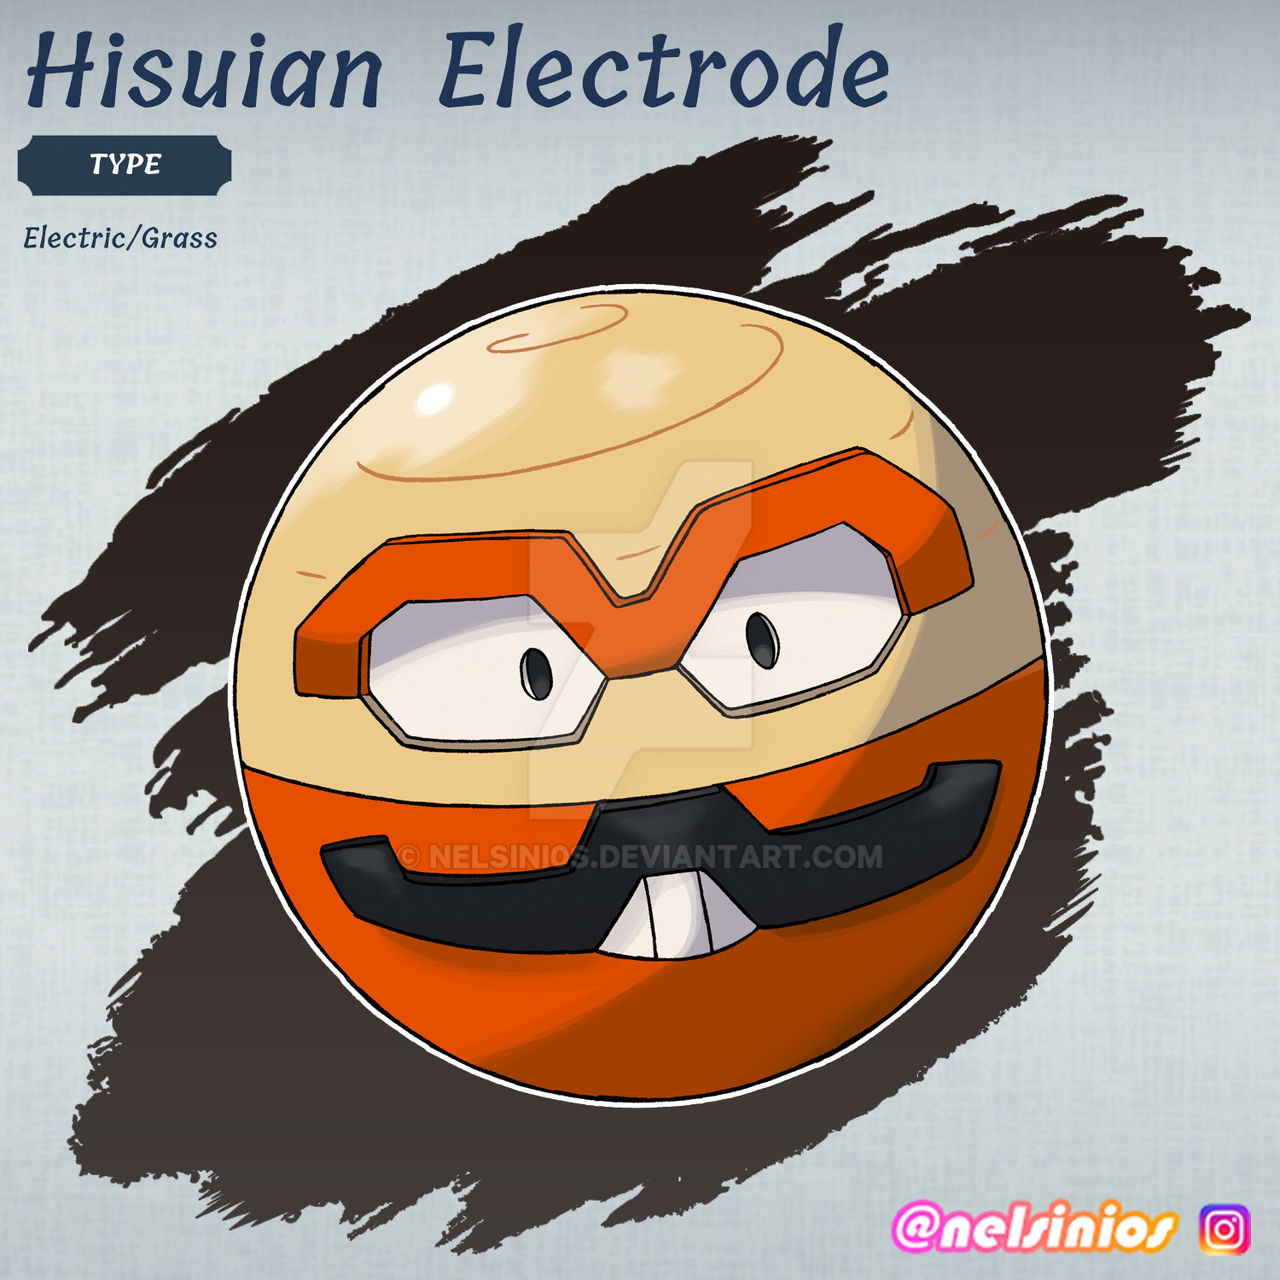 Bulbagarden - The original Pokémon community on X: Now THAT'S an  interesting typing! If Hisuian Voltorb's evolution has stats similar to  Kantonian Electrode, it'll be the fastest Grass-type we've seen yet!   /